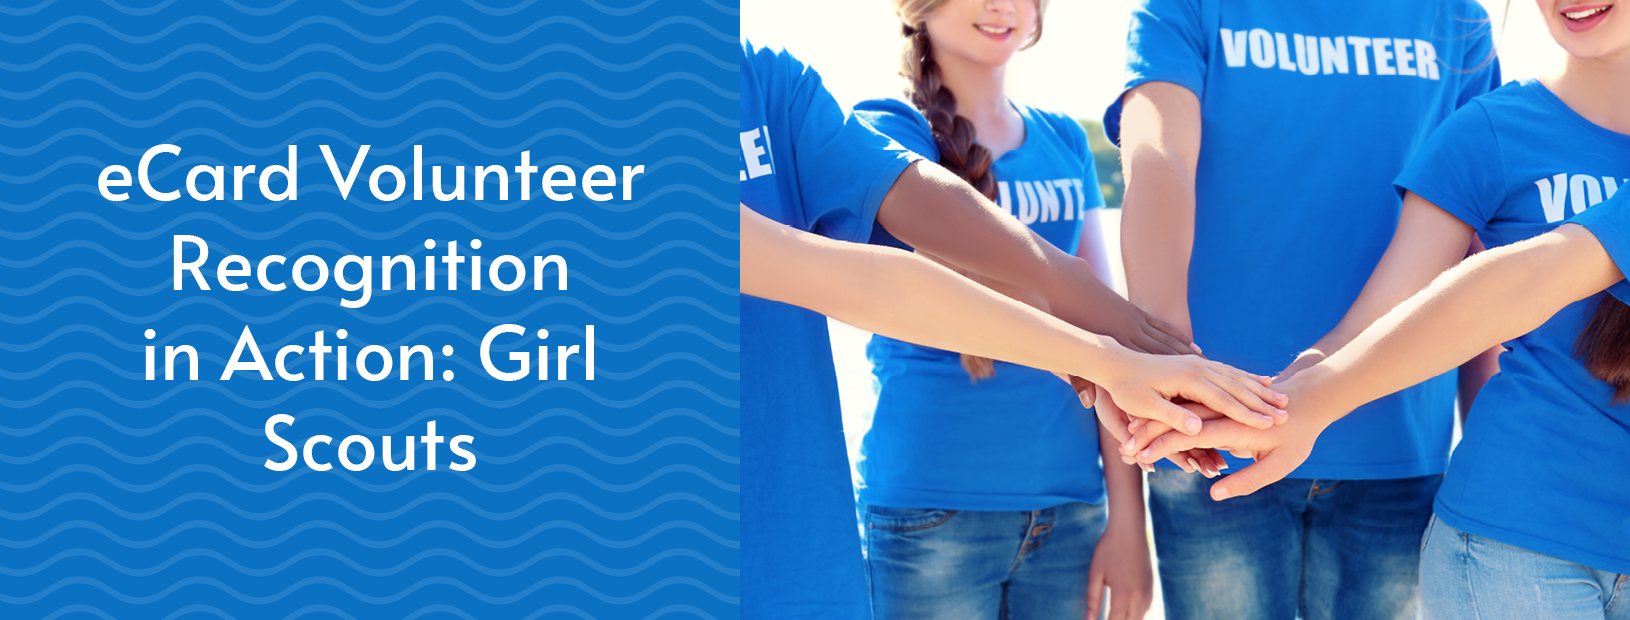 This article explores how the Girl Scouts used eCards in their volunteer appreciation strategy.